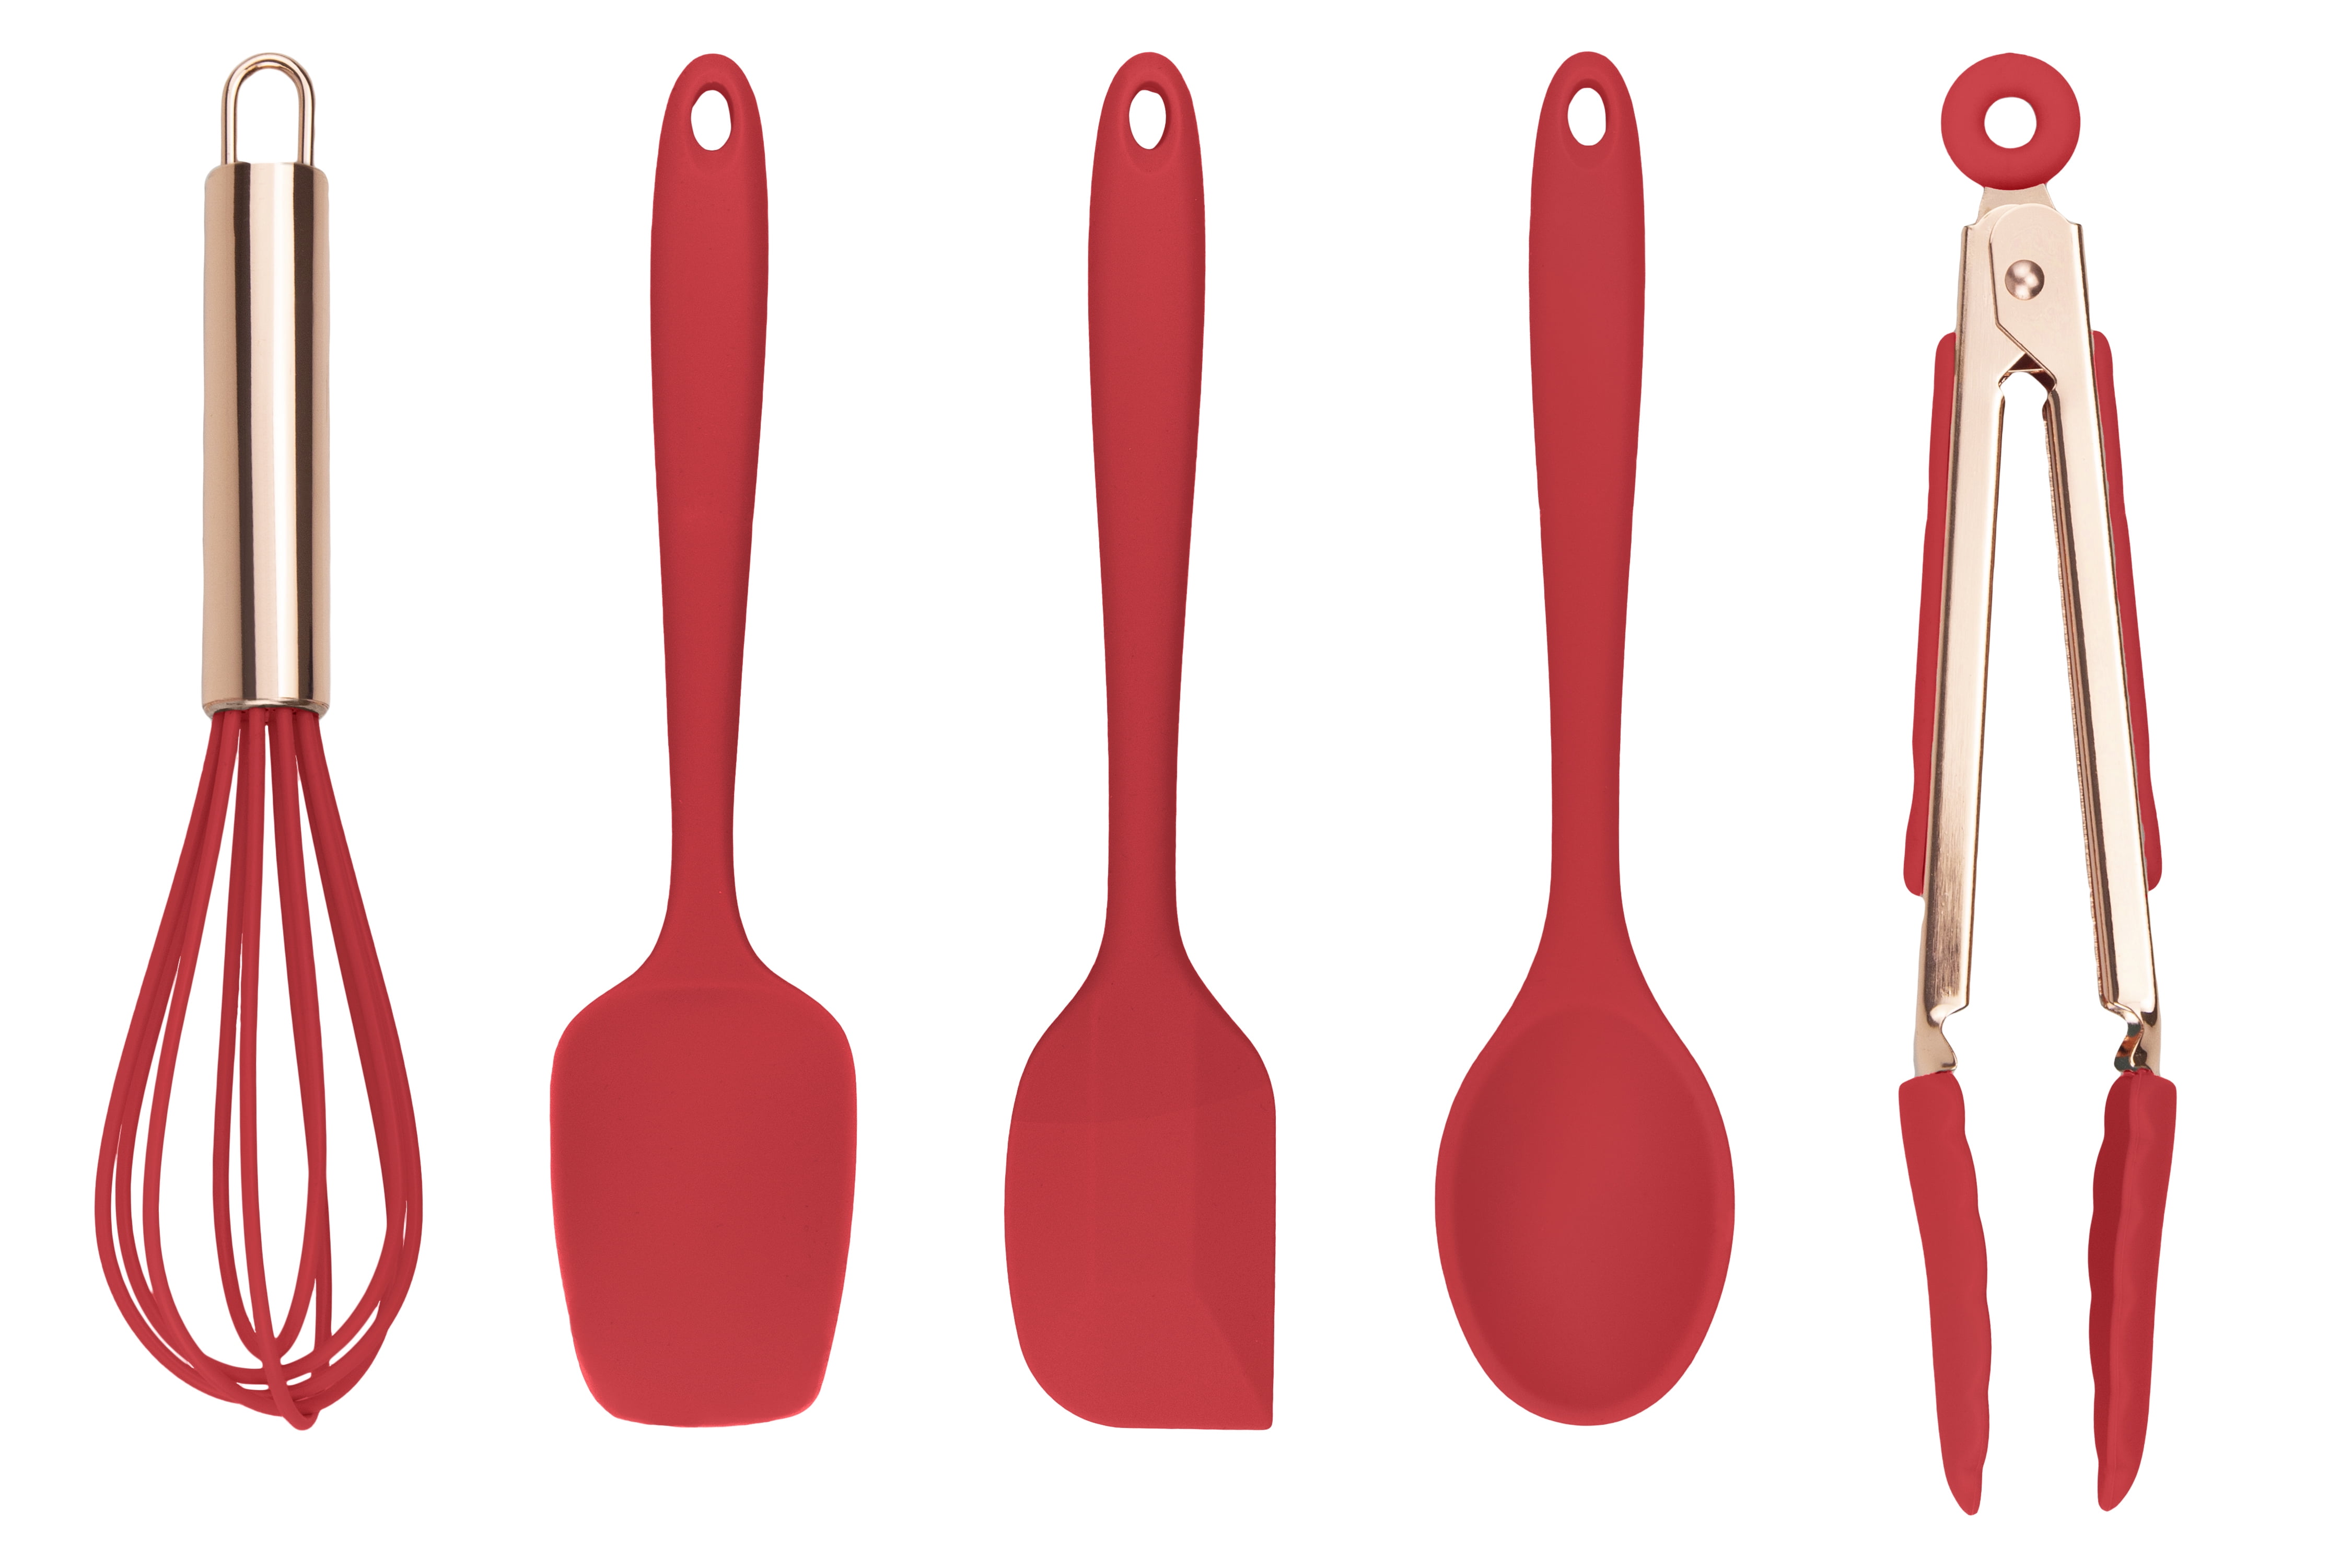 Lot of 5 Cooking Concepts Mini Silicone Cooking Utensils